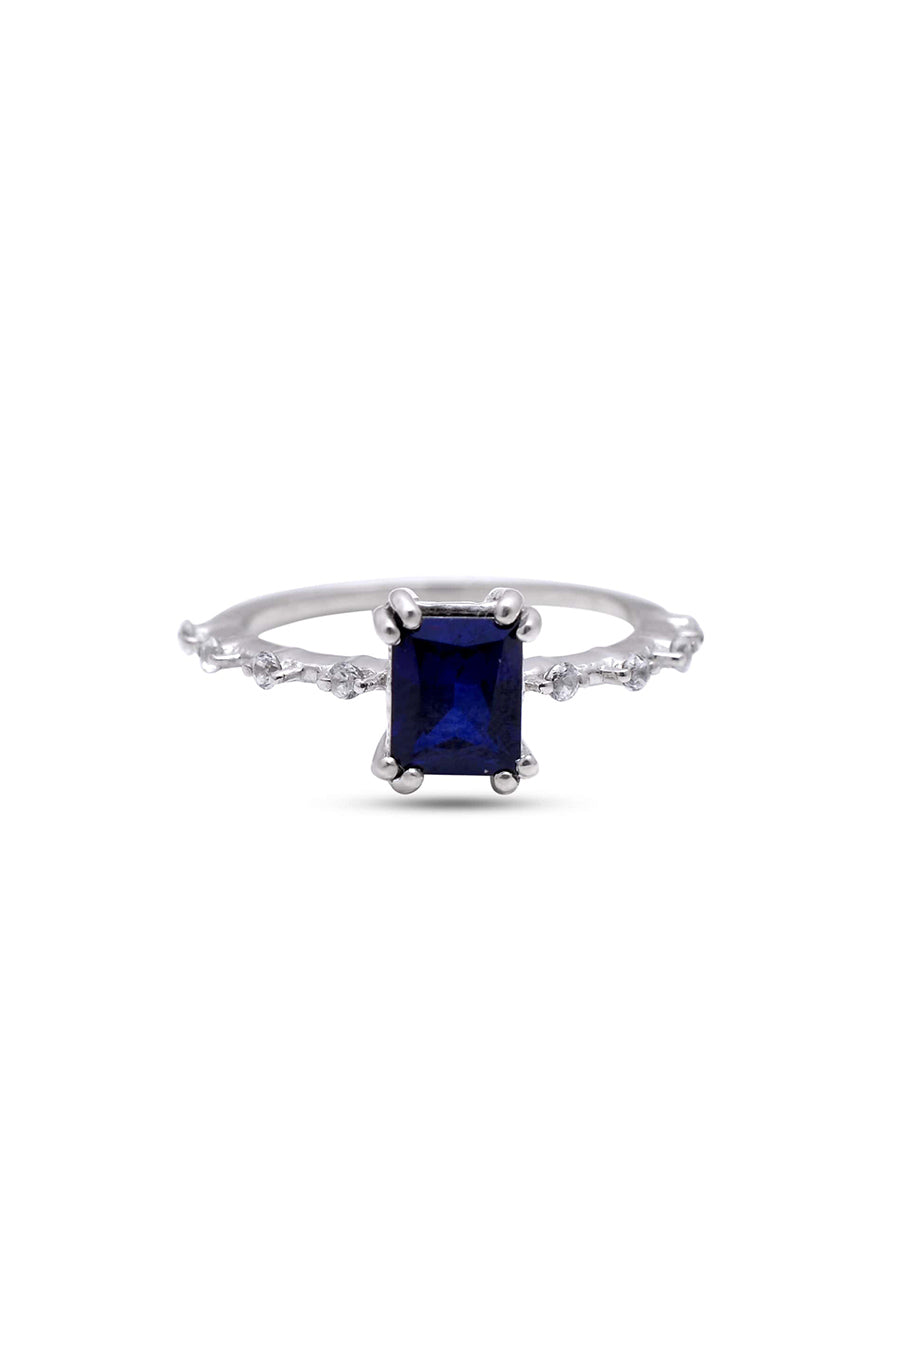 Real Sapphire Star Studded Ring in 925 Silver